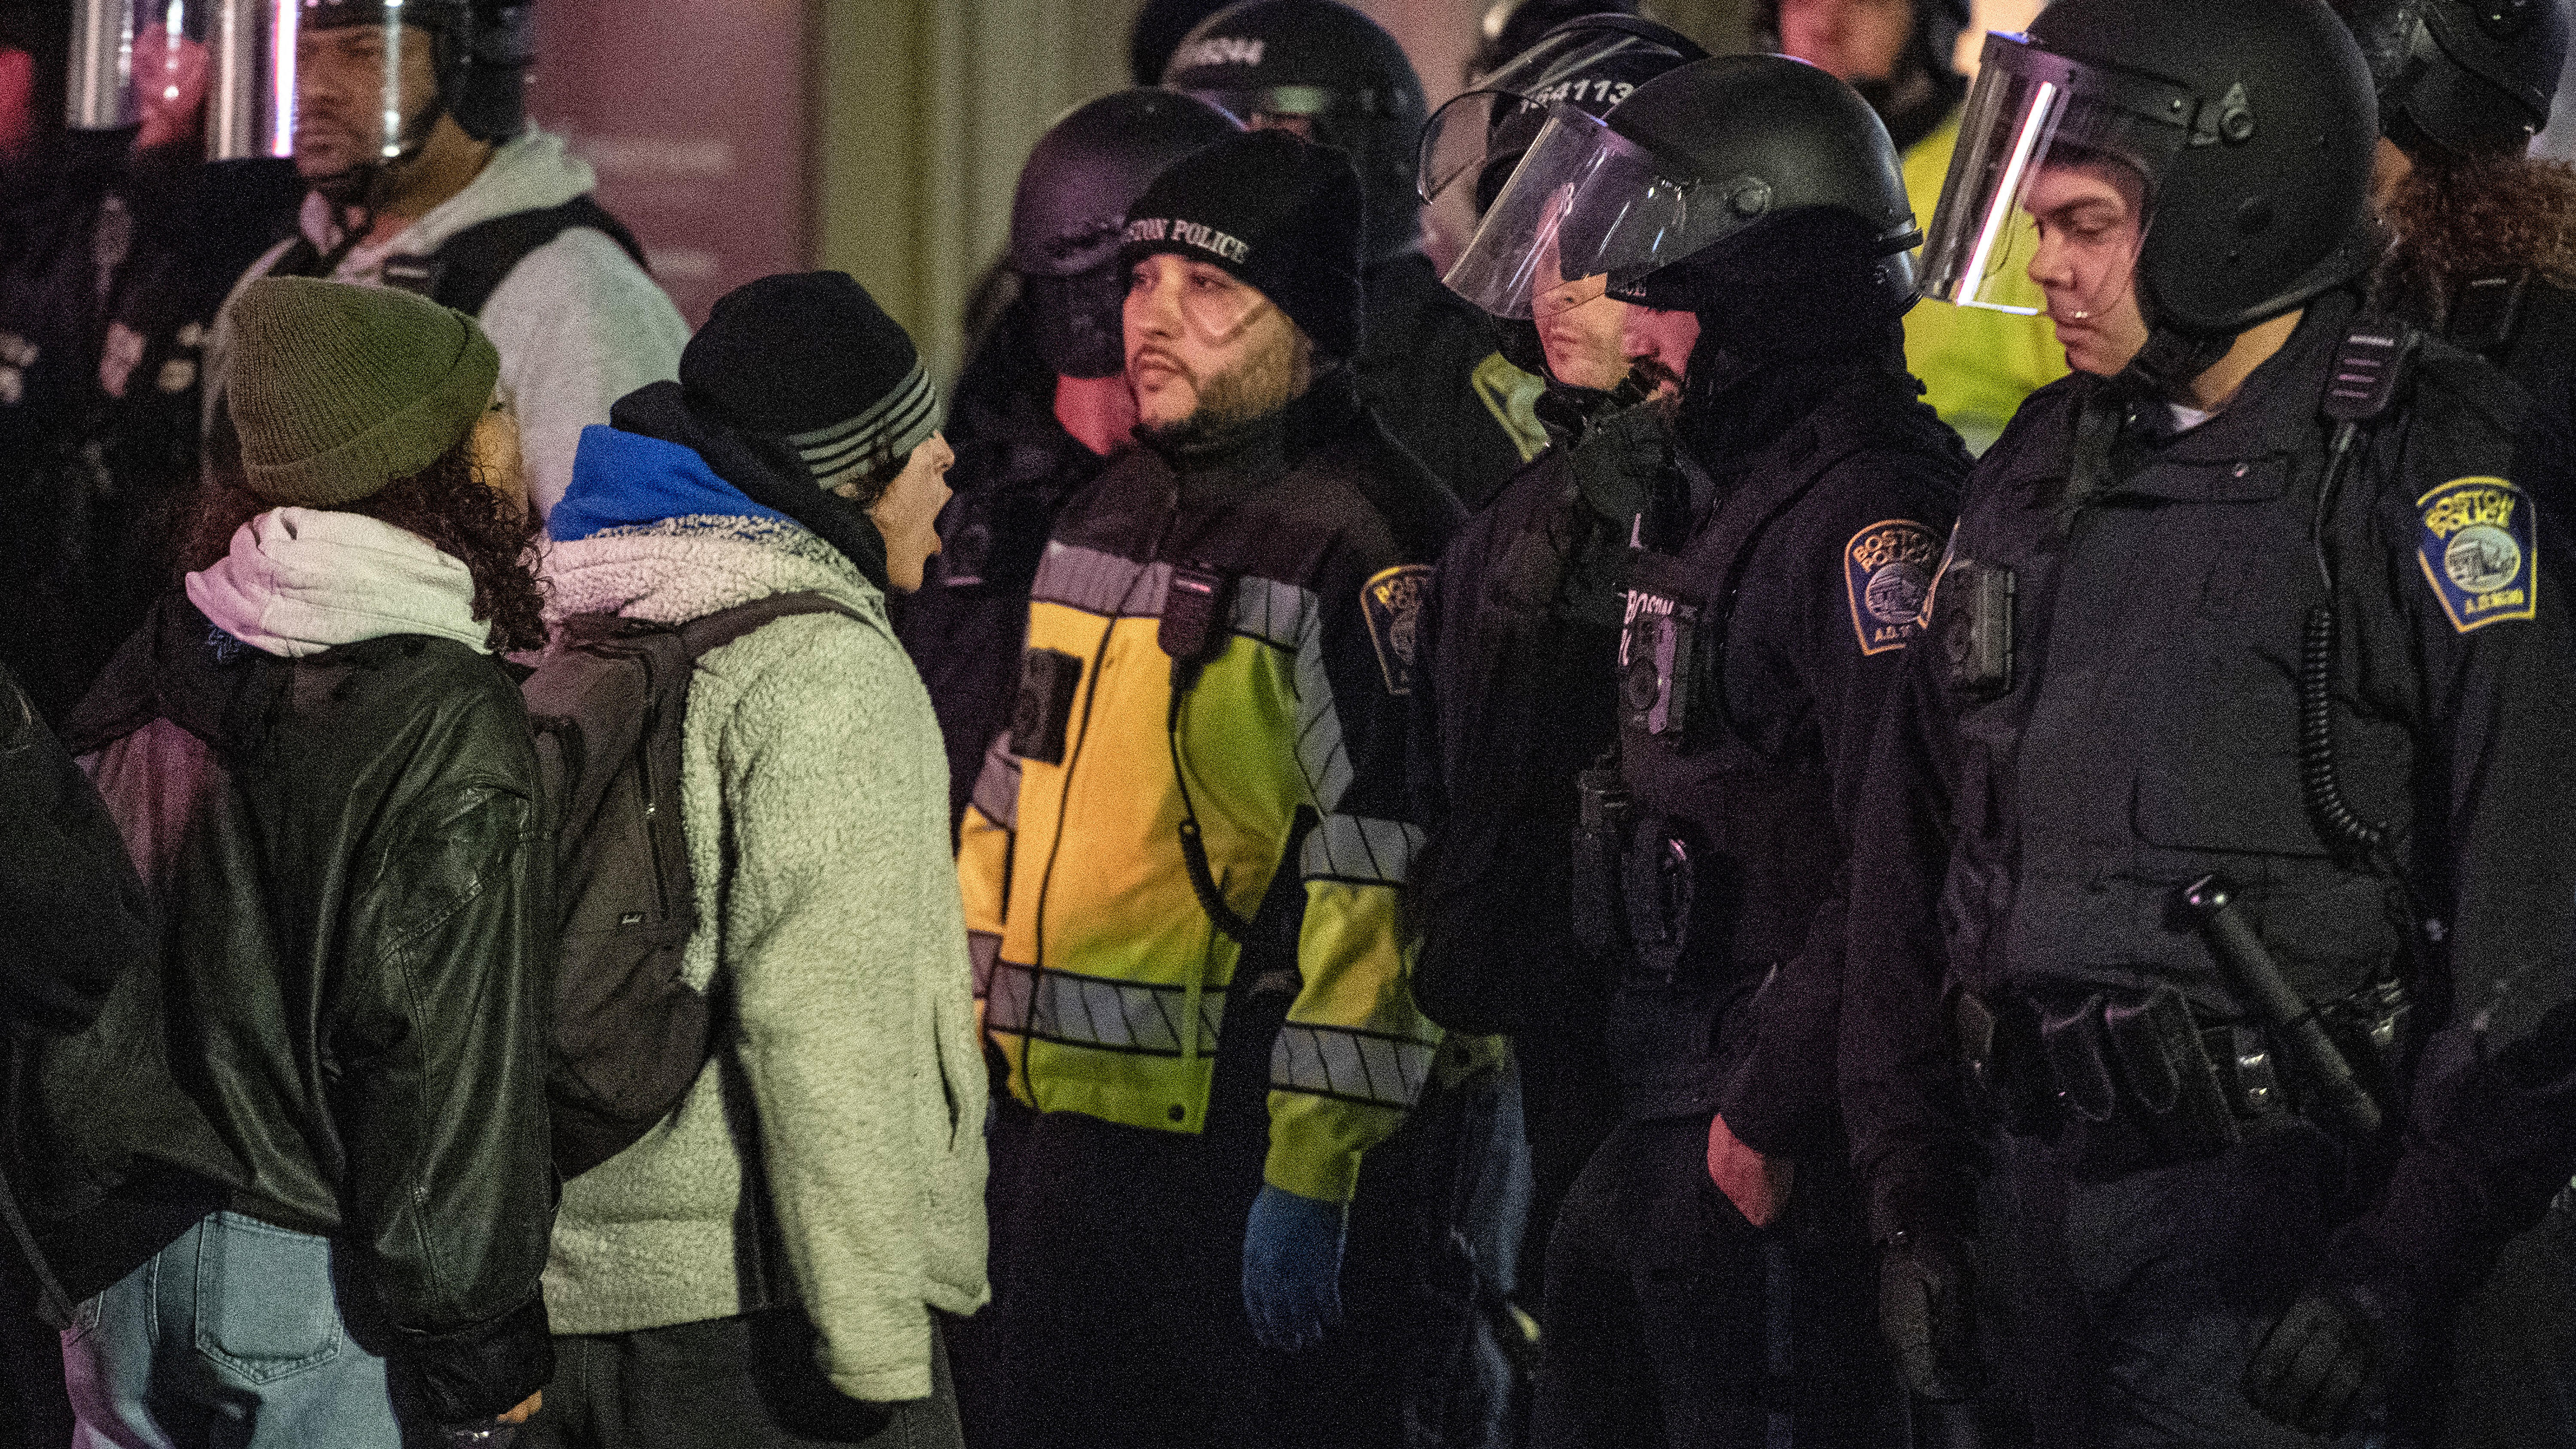 108 arrested at Emerson College protest, 4 Boston police officers hurt